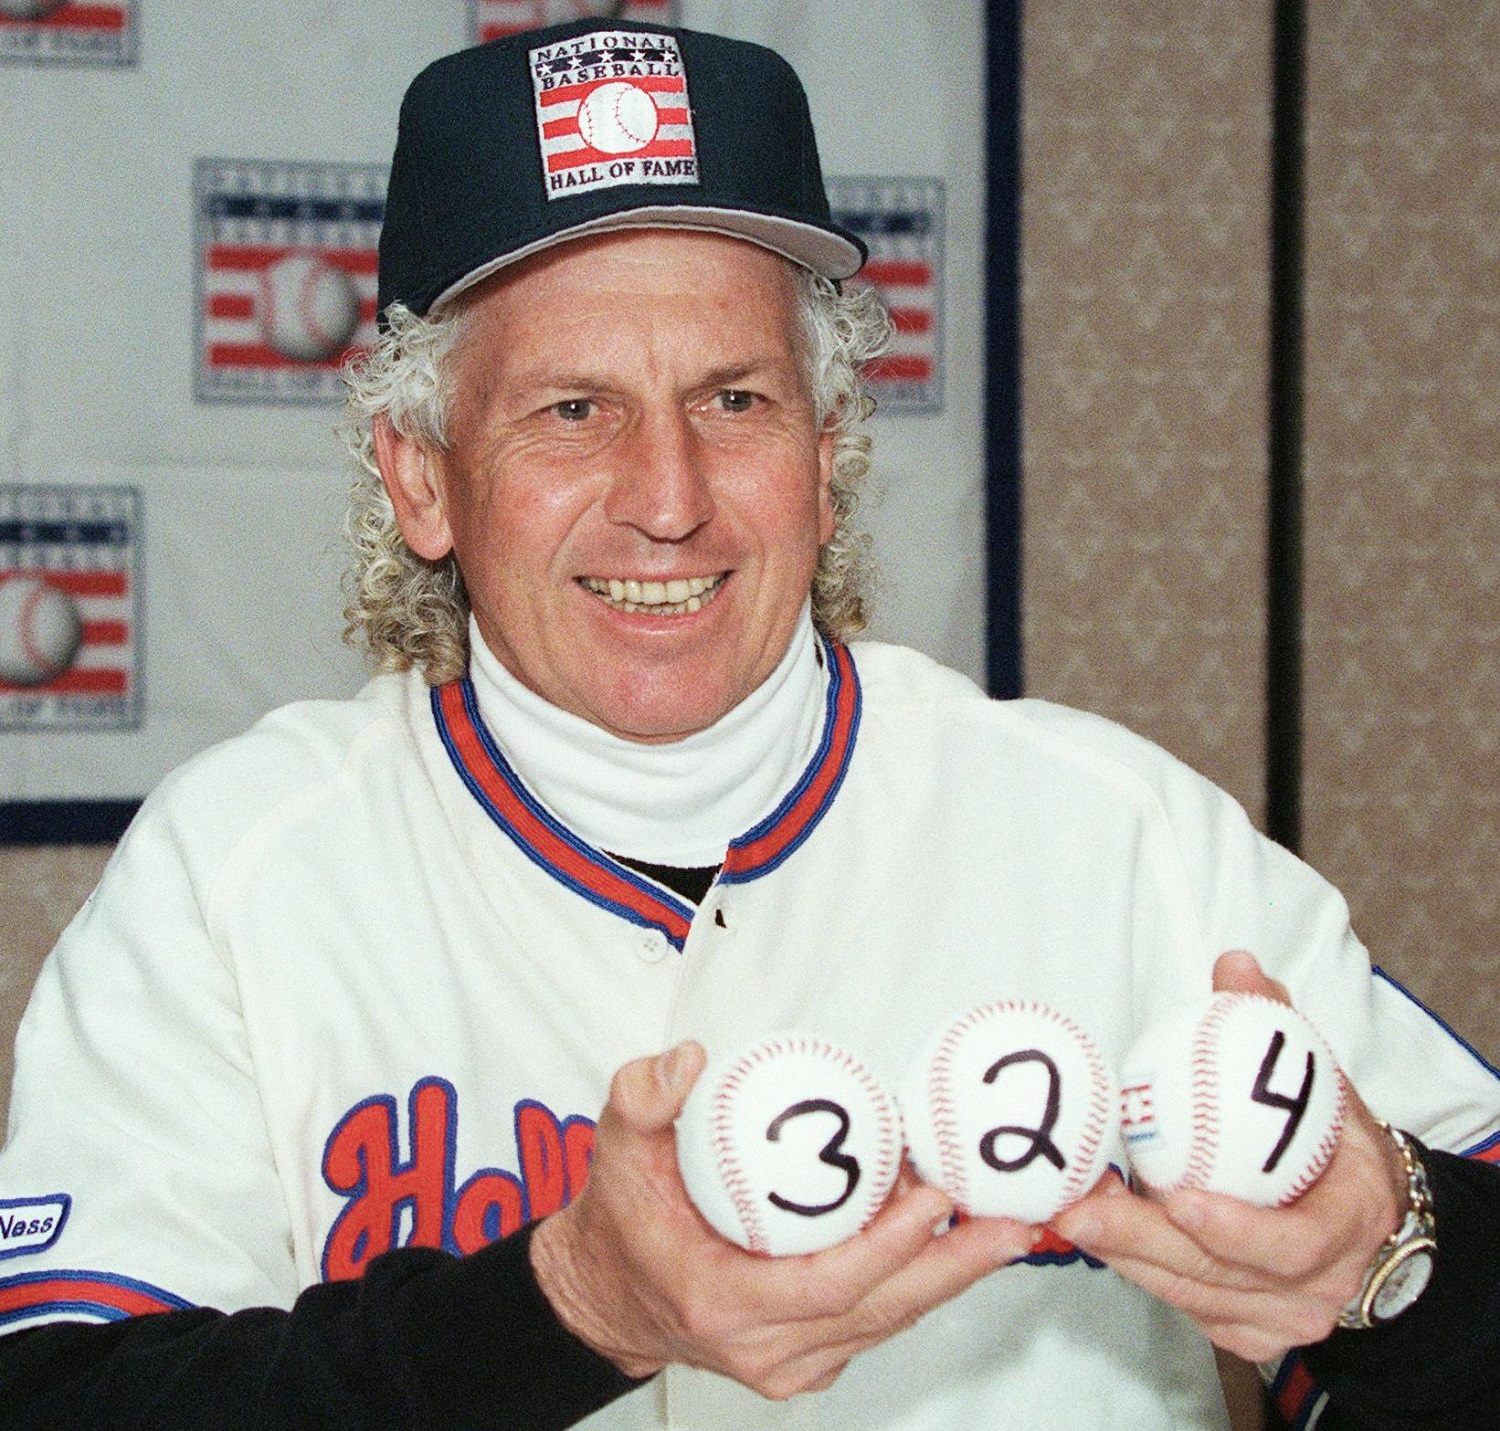 Don Sutton Was Once Accused of Setting Up His Teammate for a DUI As a Way to Get Him Out of the Starting Rotation